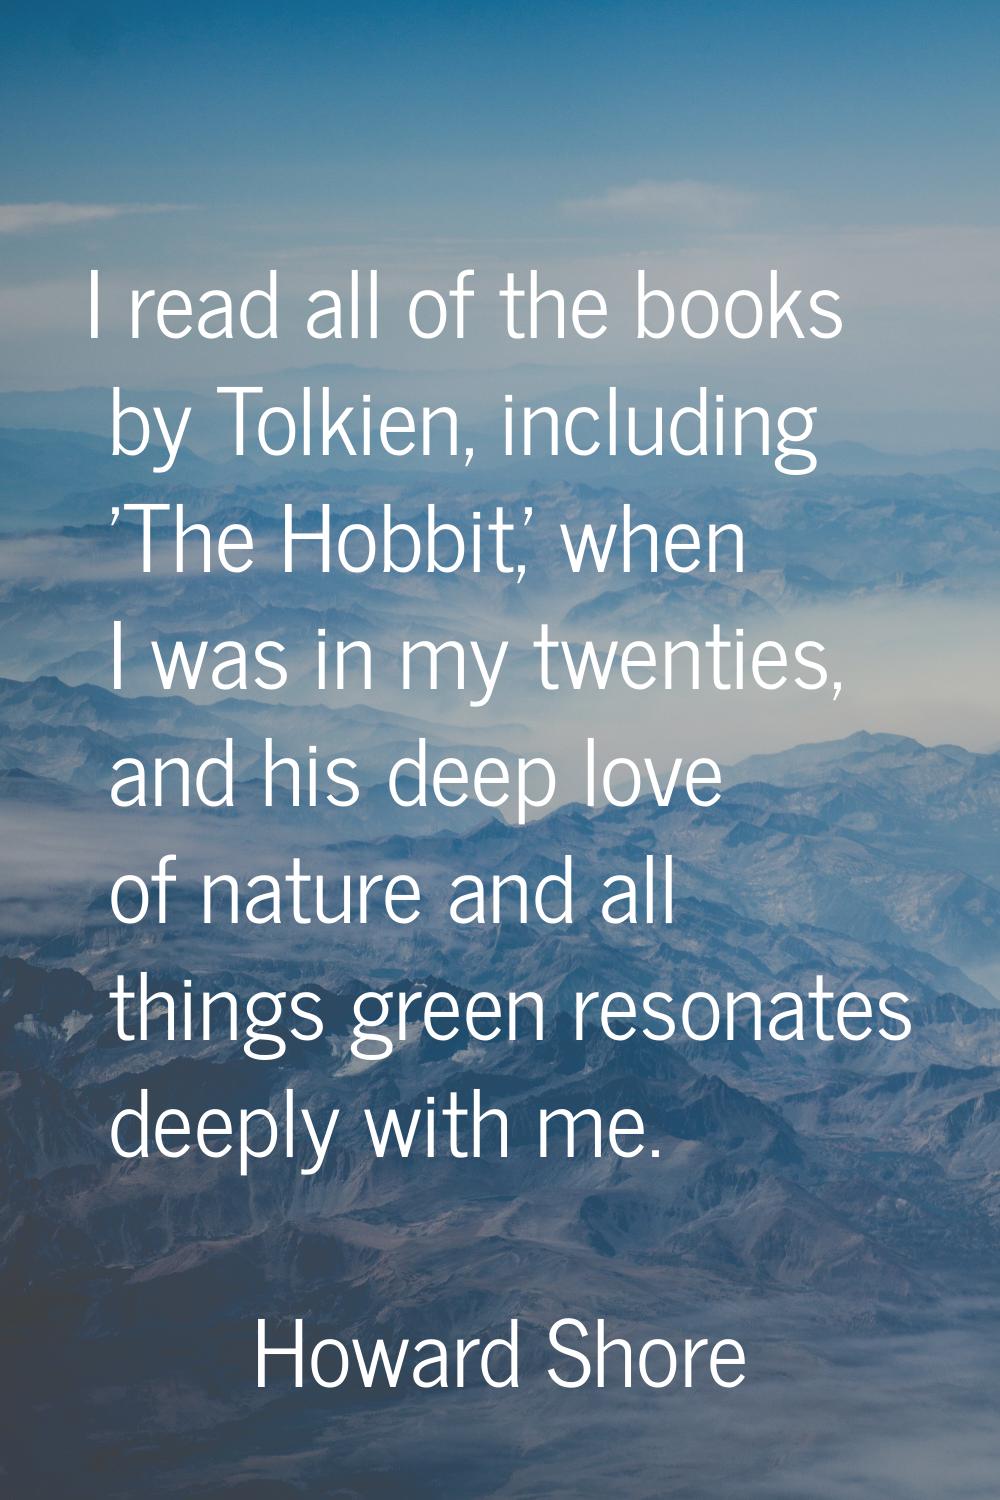 I read all of the books by Tolkien, including 'The Hobbit,' when I was in my twenties, and his deep